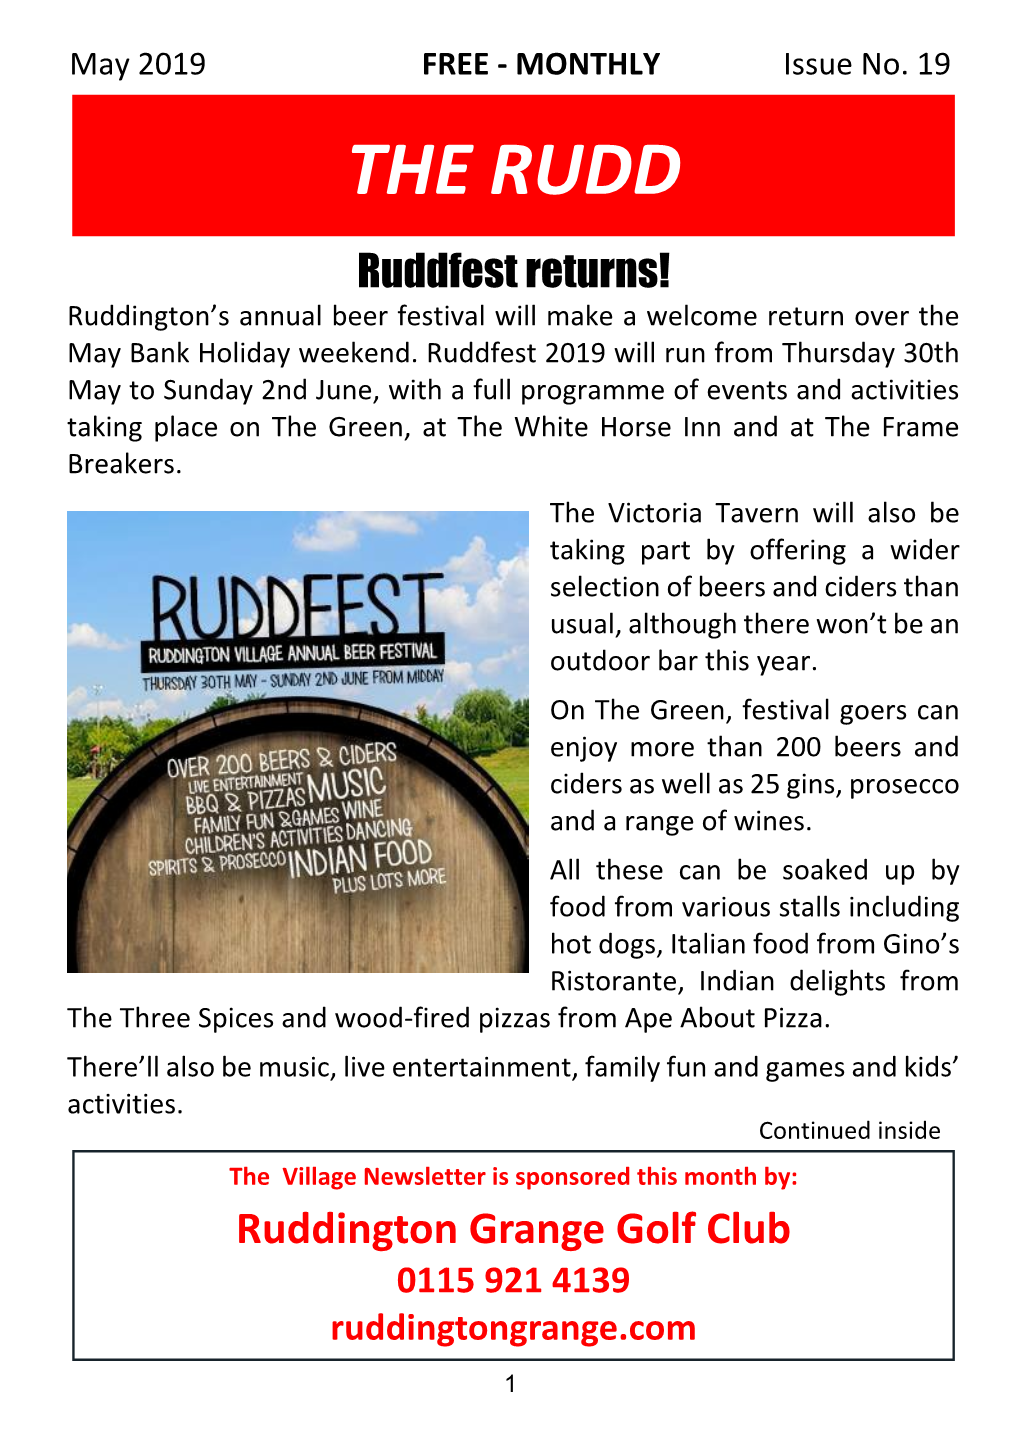 THE RUDD Ruddfest Returns! Ruddington’S Annual Beer Festival Will Make a Welcome Return Over the May Bank Holiday Weekend